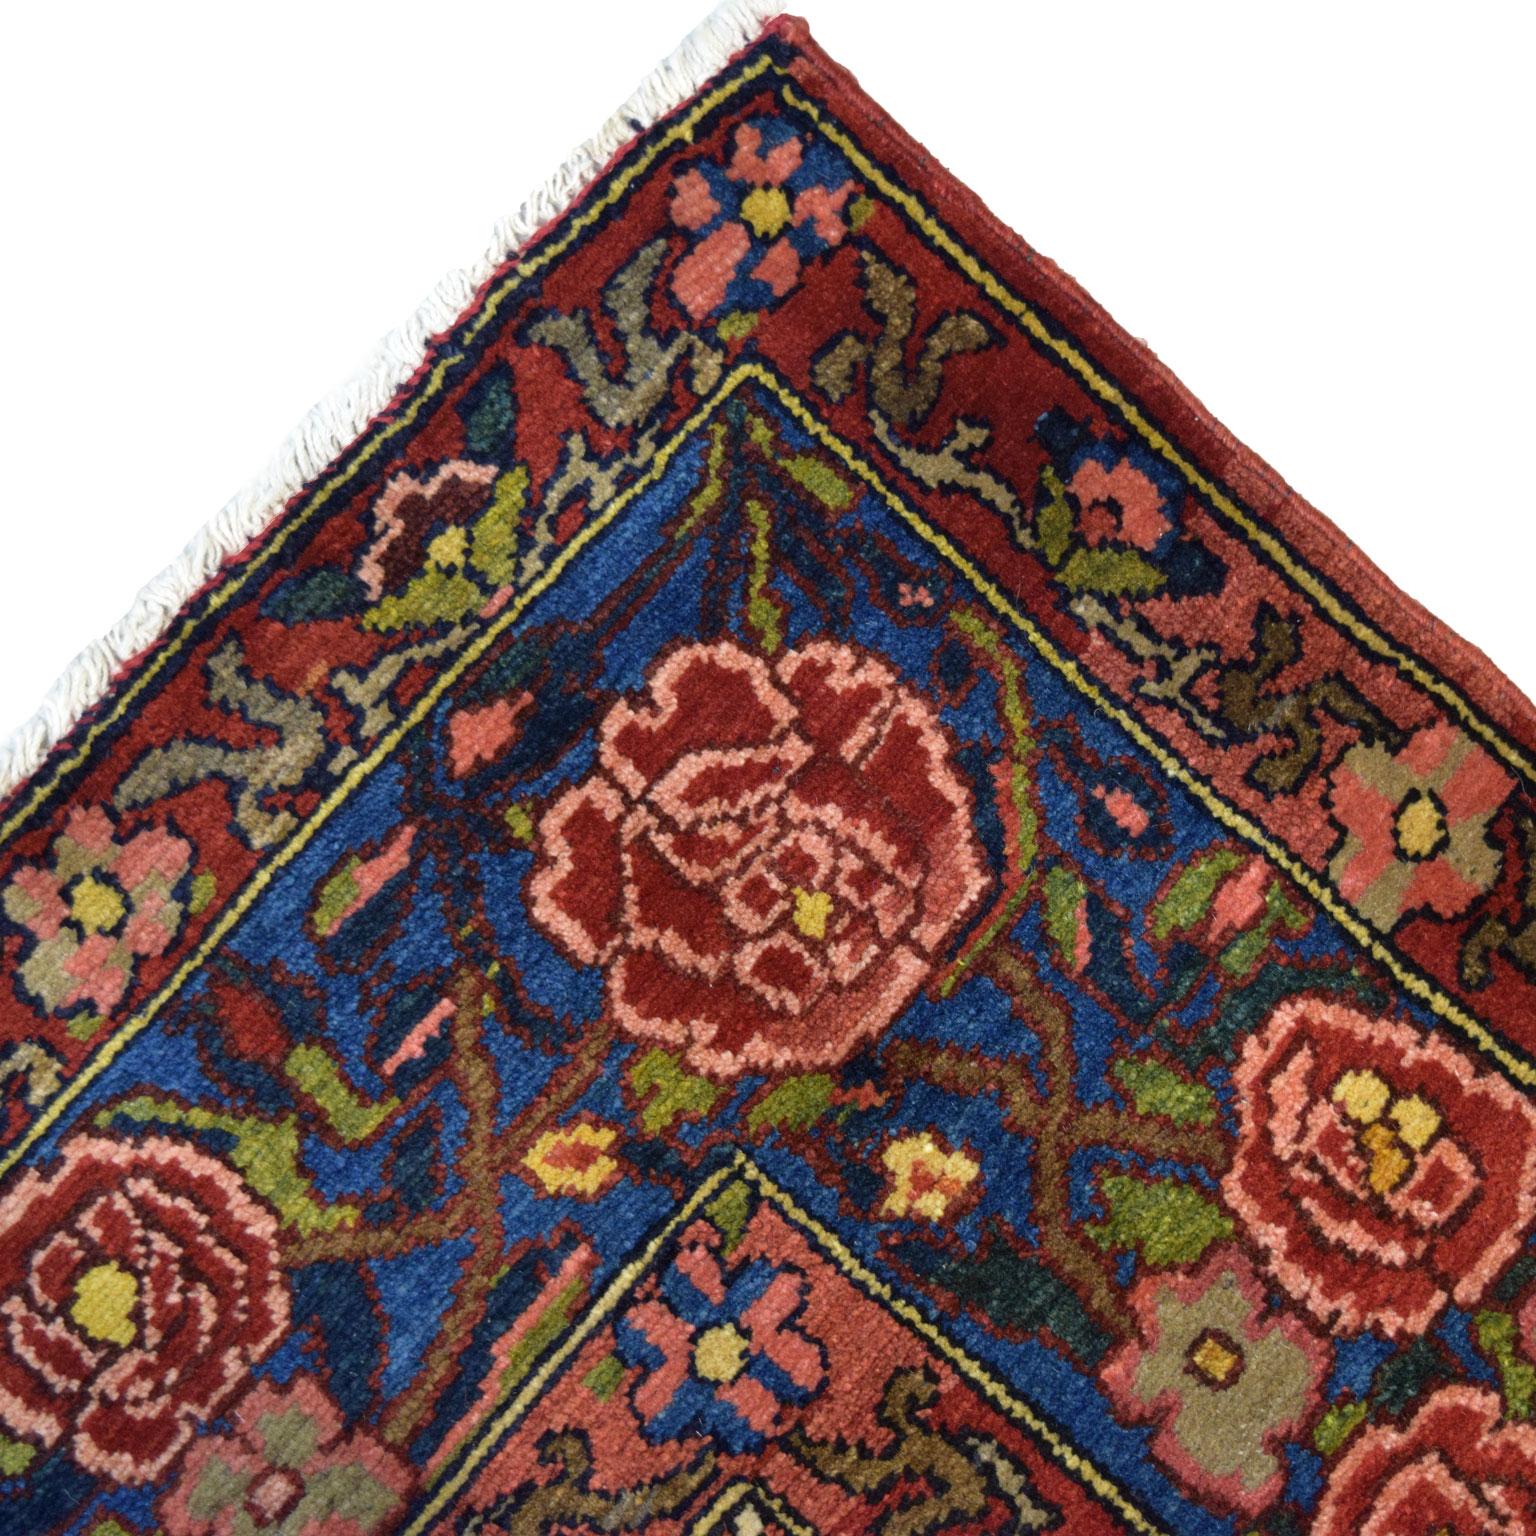 Antique 1920s Wool Persian Bibibaft Bakhtiari Rug in Gold, Red and Pink, 5' x 7' For Sale 6